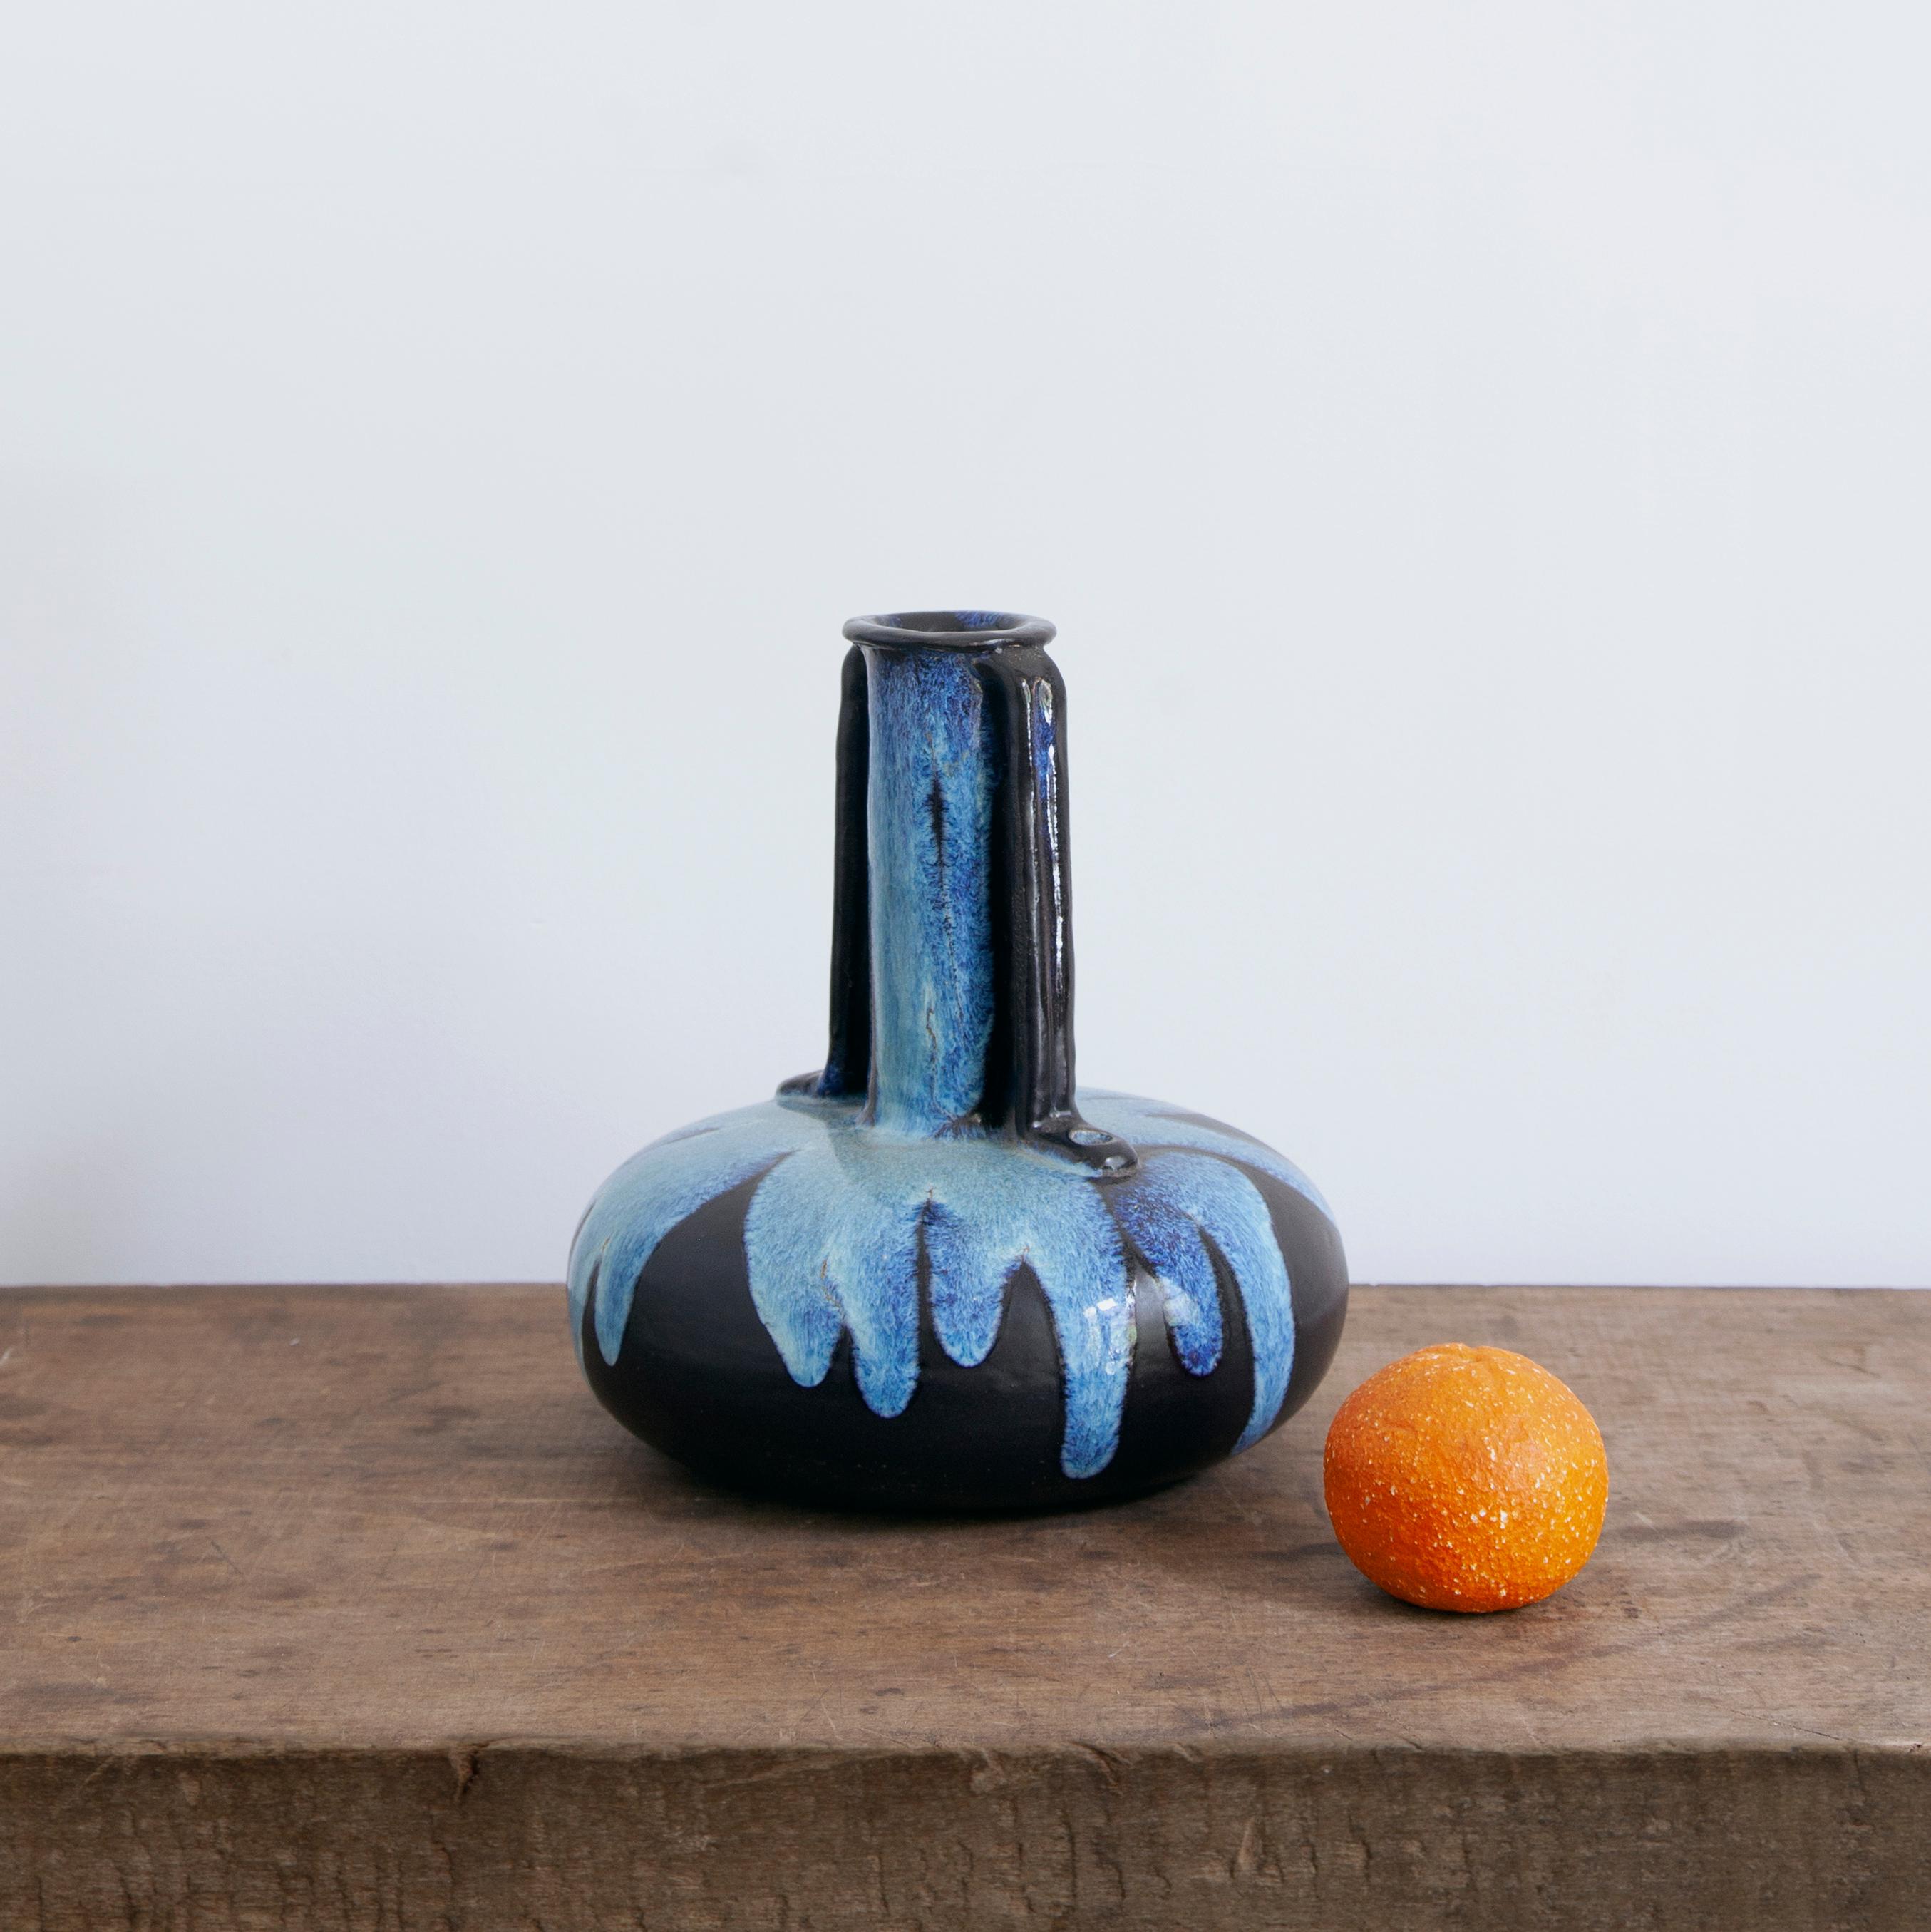 Mid-Century Modern sculptural ceramic vase. Made in Belgium circa 1950, this ceramic vase is decorated with drip glaze. Simple but dramatic form makes this piece an elegant Mid-Century Modern addition to any interior.